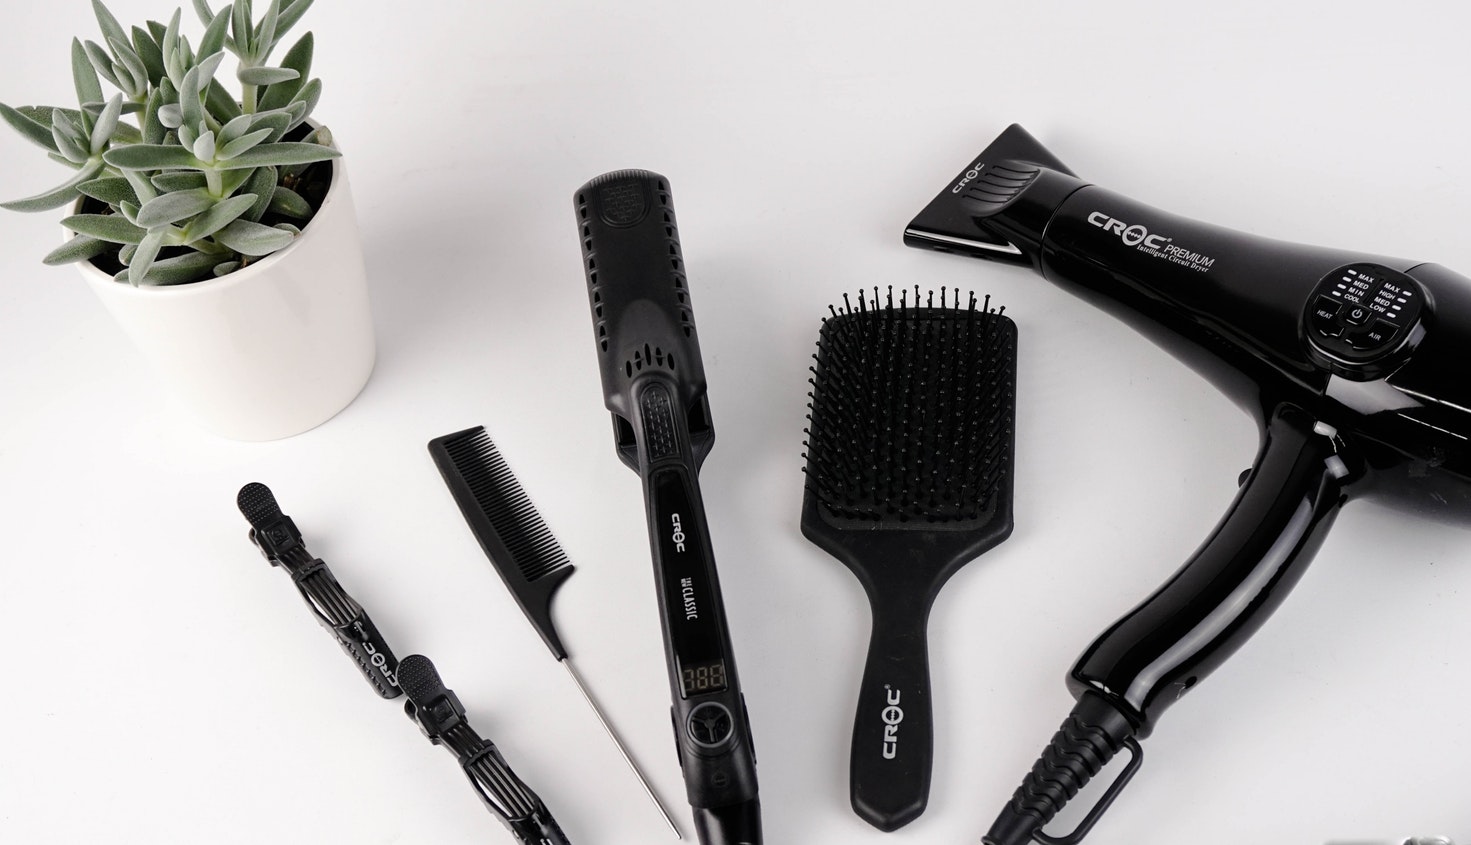 Grooming tools including hairdryer, comb and brush